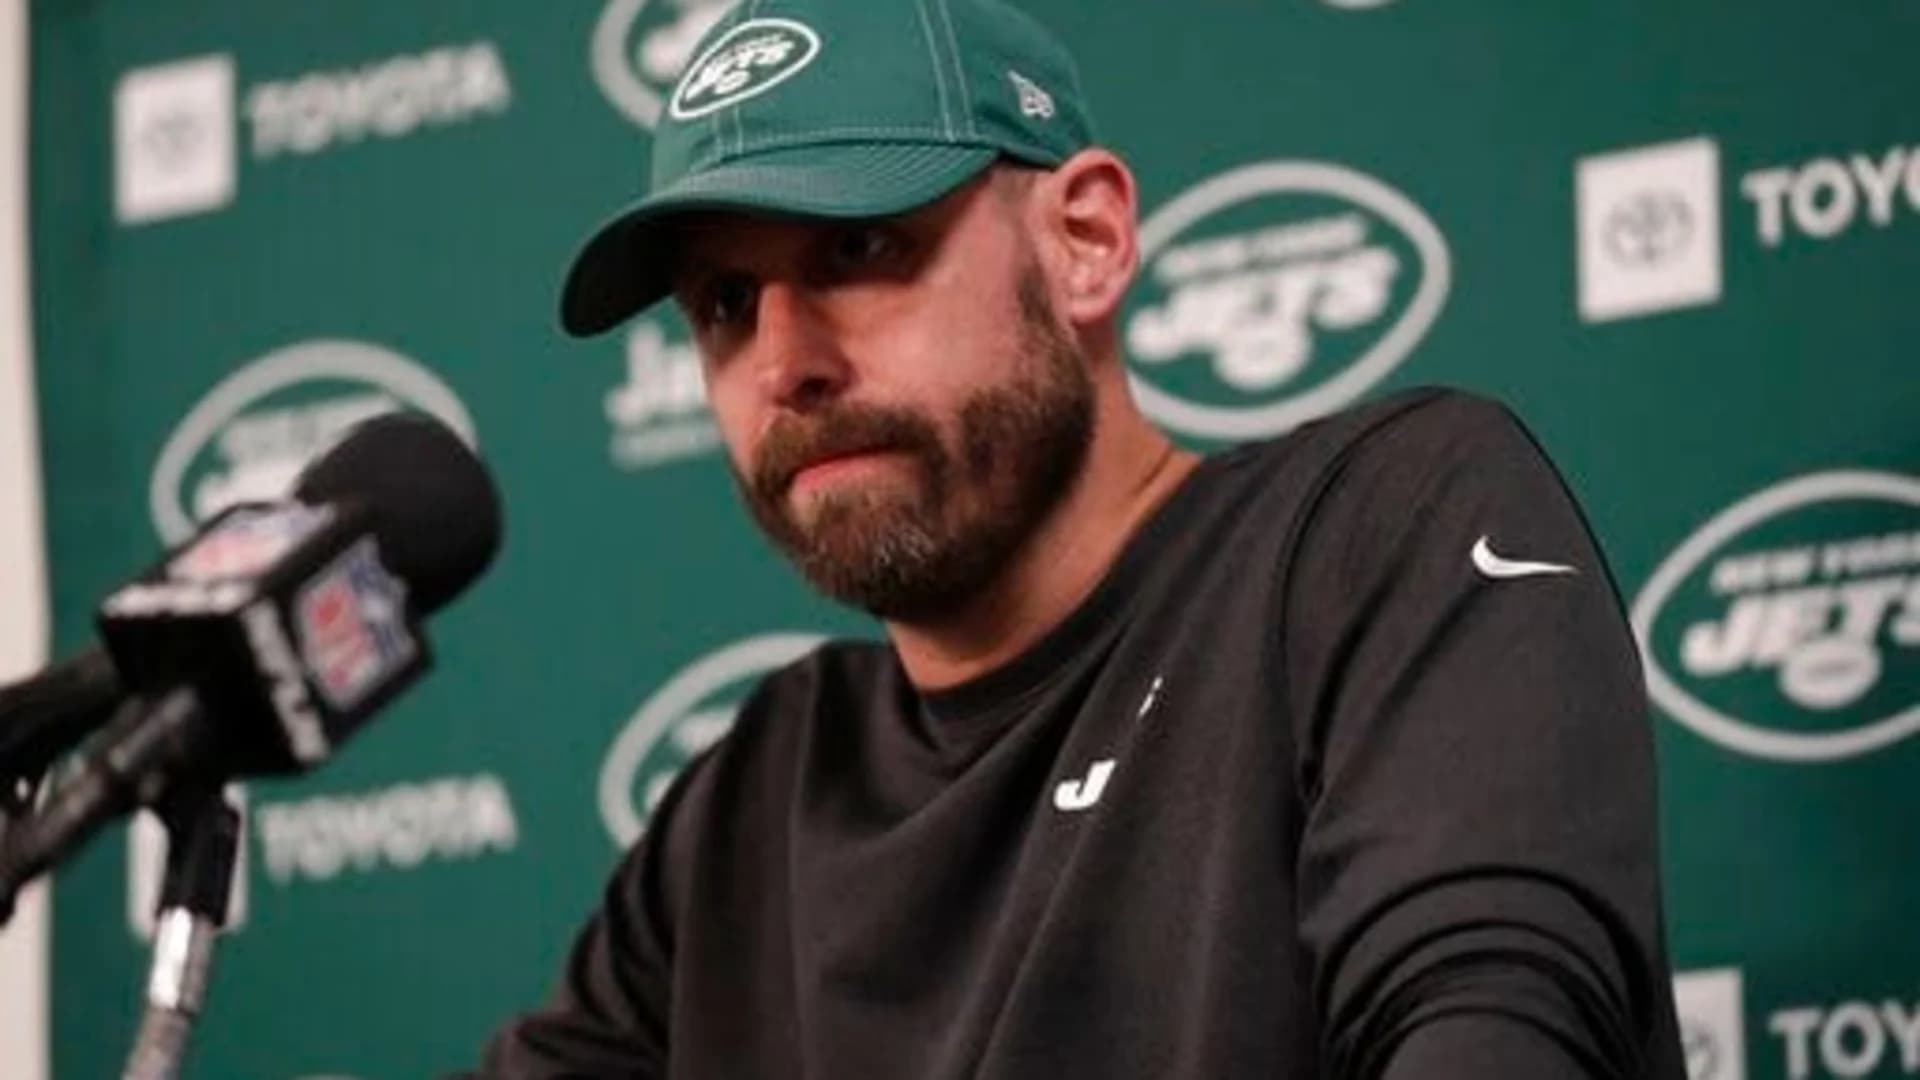 Jets' Johnson: Gase's job safe, will remain coach in 2020